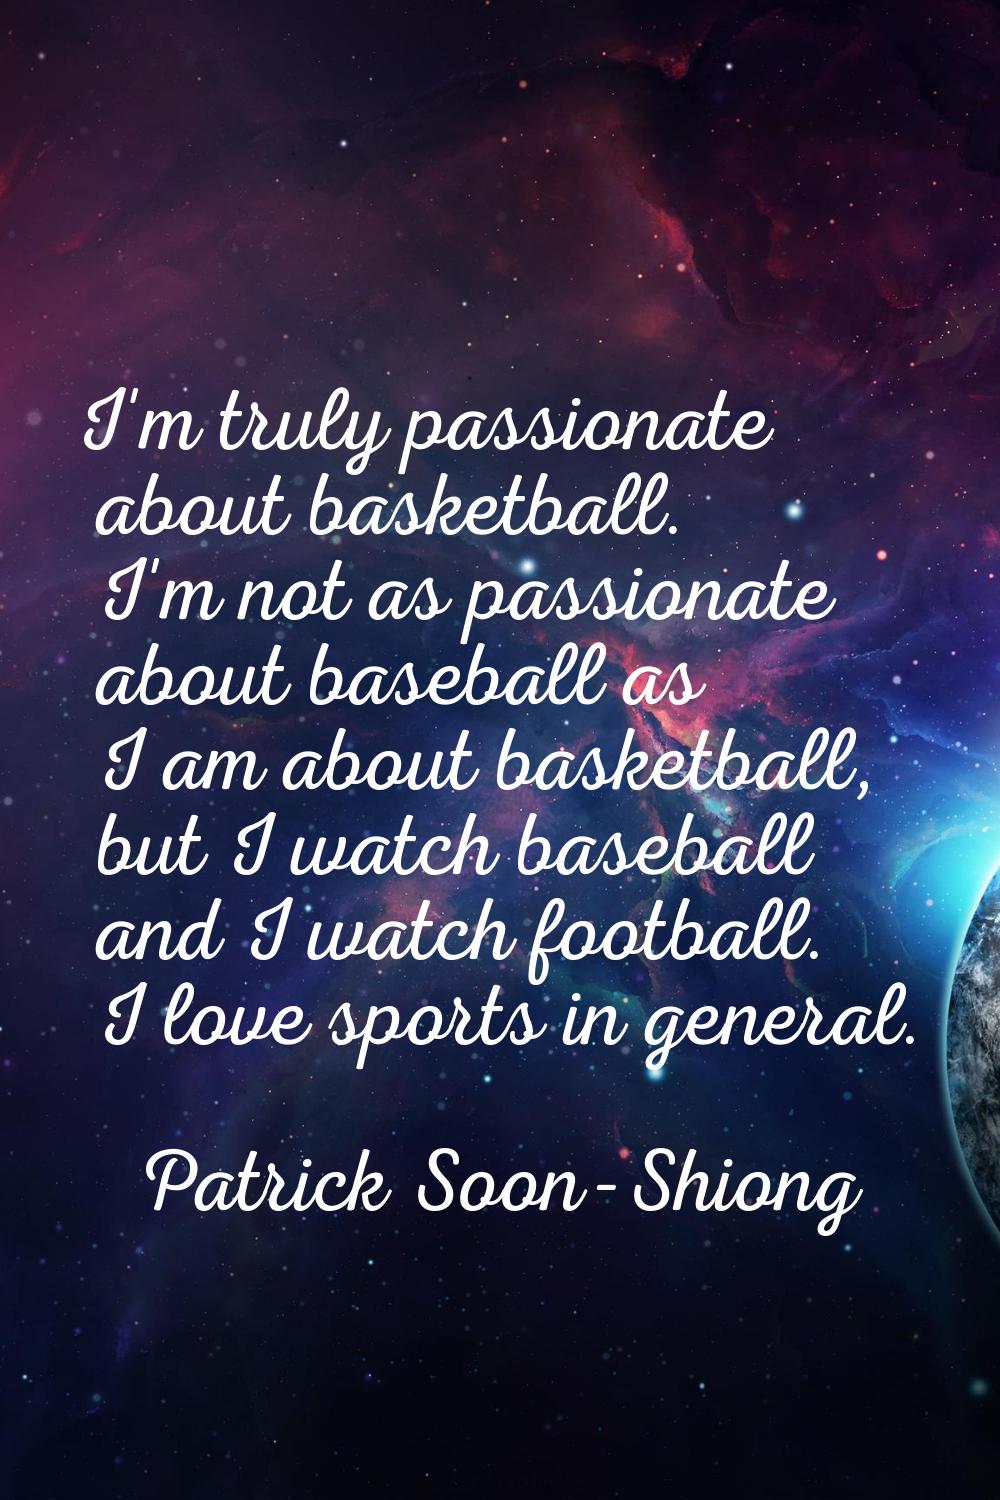 I'm truly passionate about basketball. I'm not as passionate about baseball as I am about basketbal